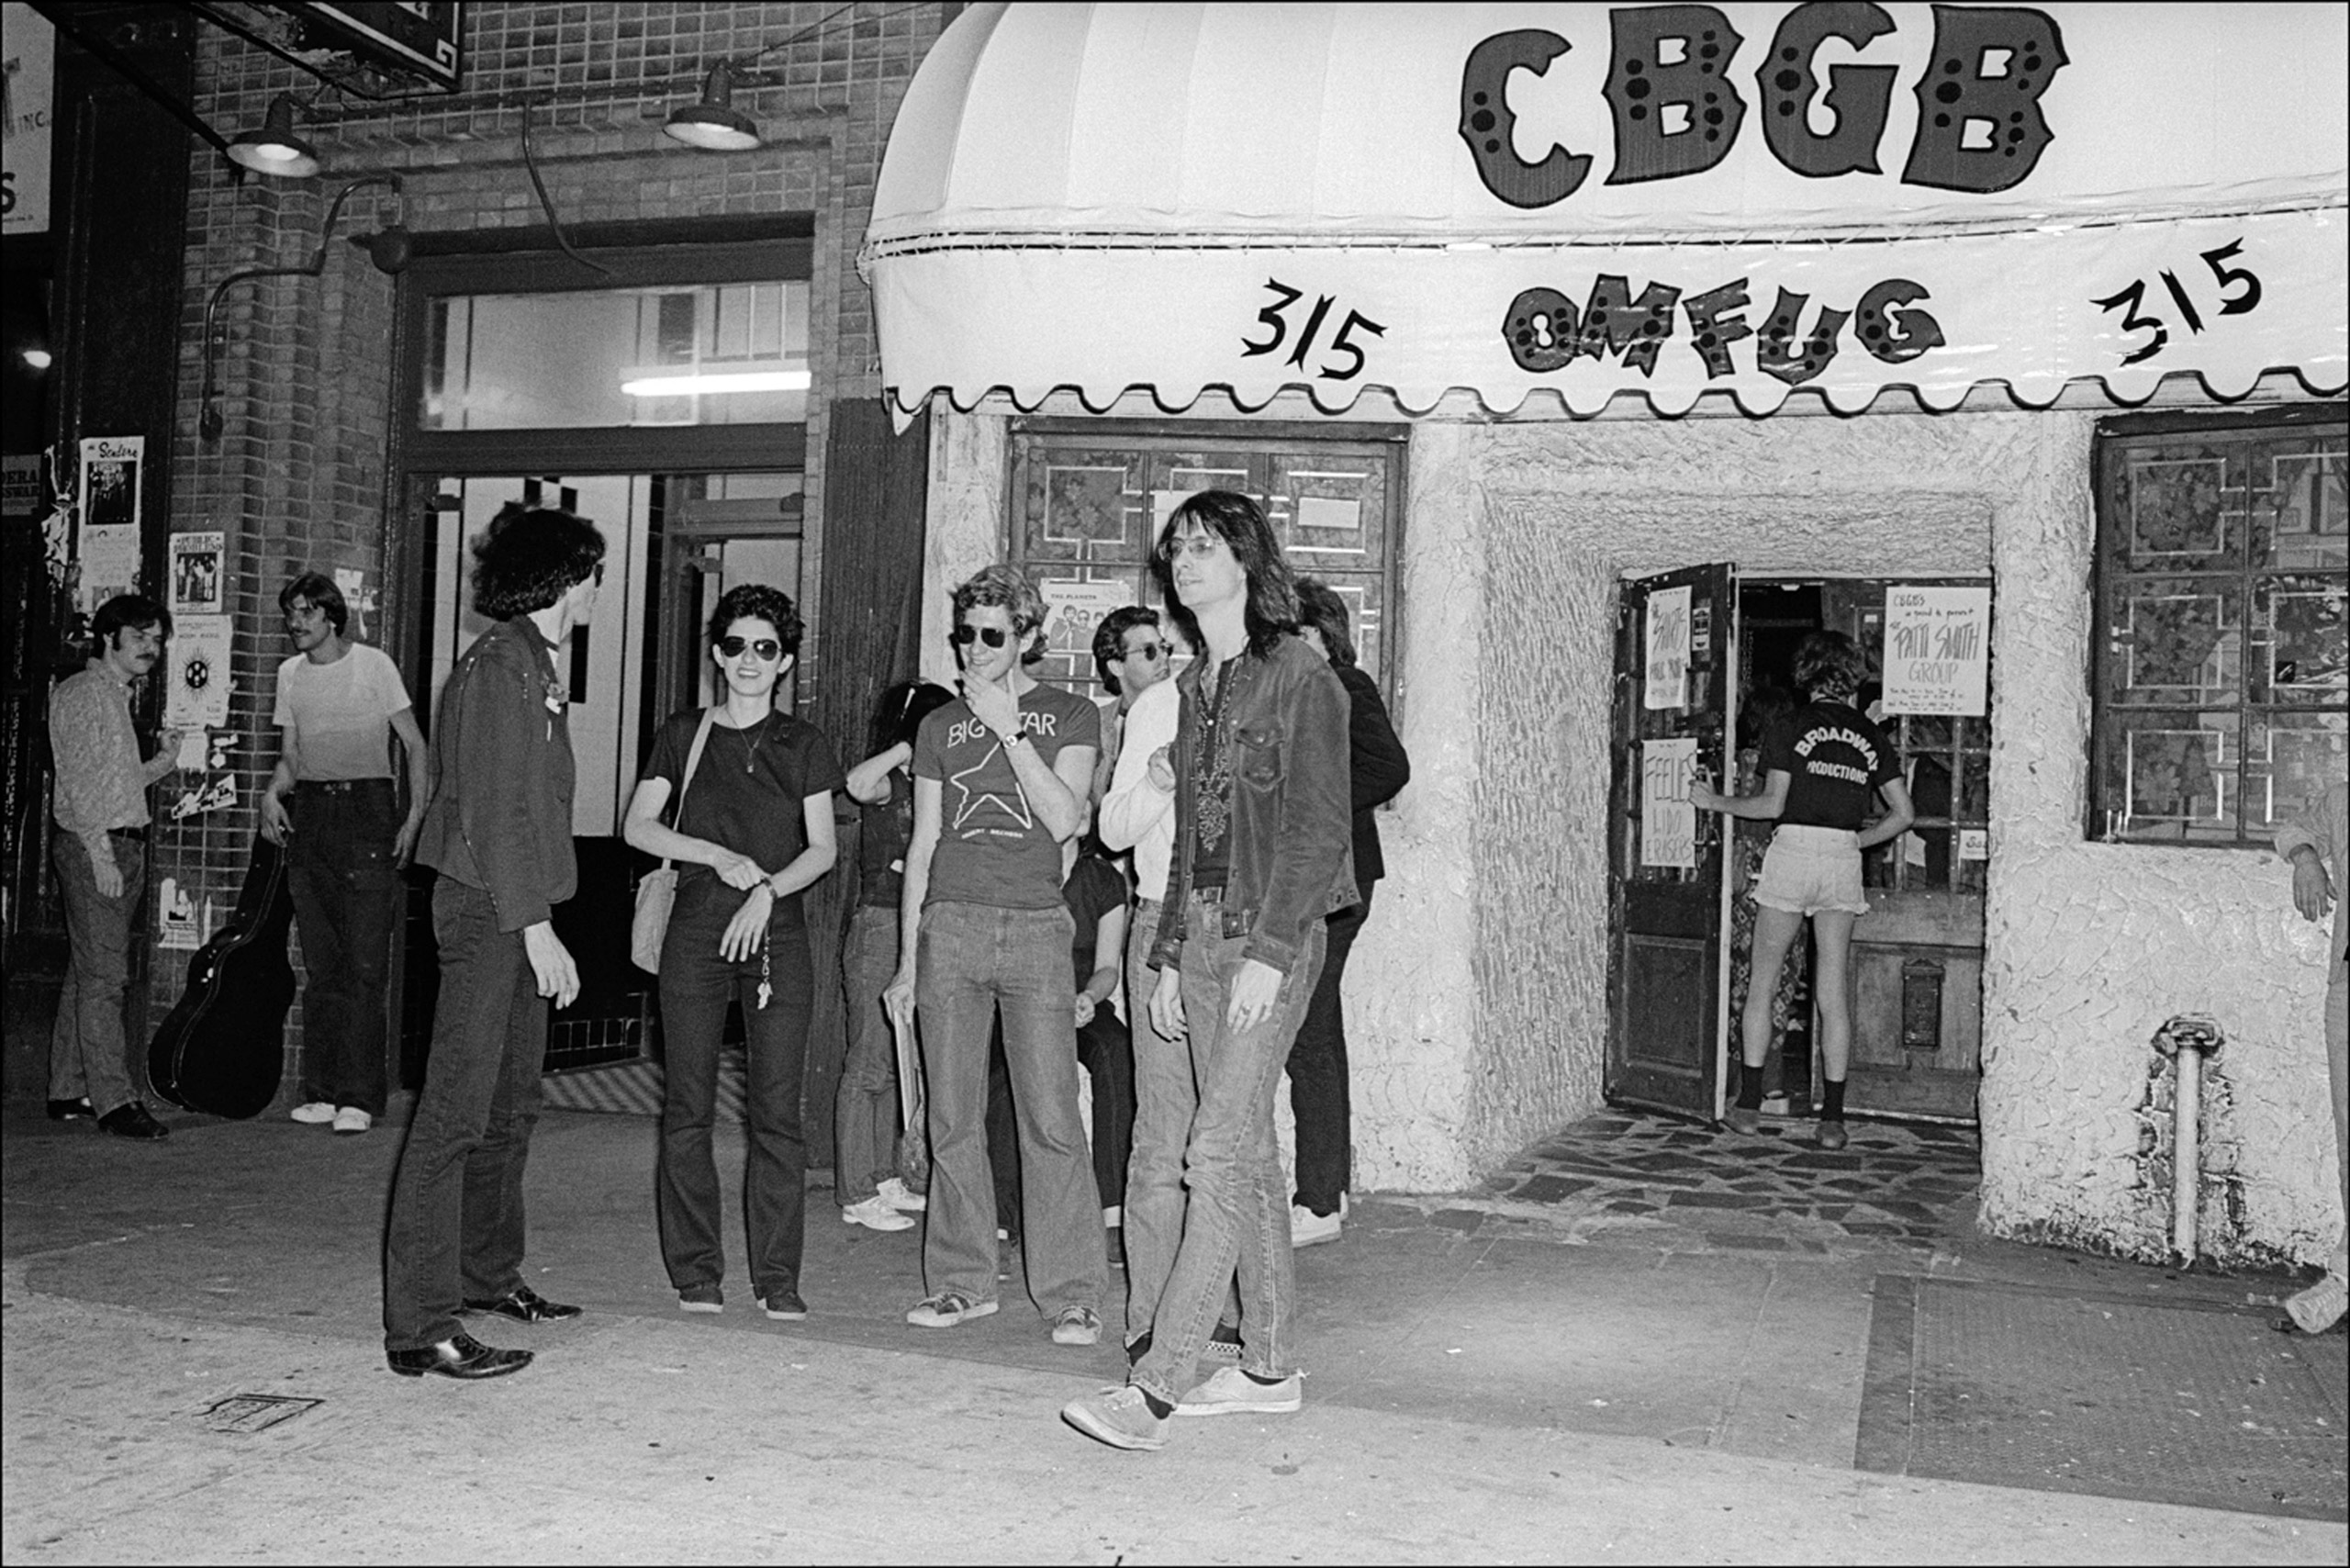 Lenny Kaye, of the Patti Smith Group, takes a break outside CBGB on the Bowery, New York, N.Y., May 28, 1977.